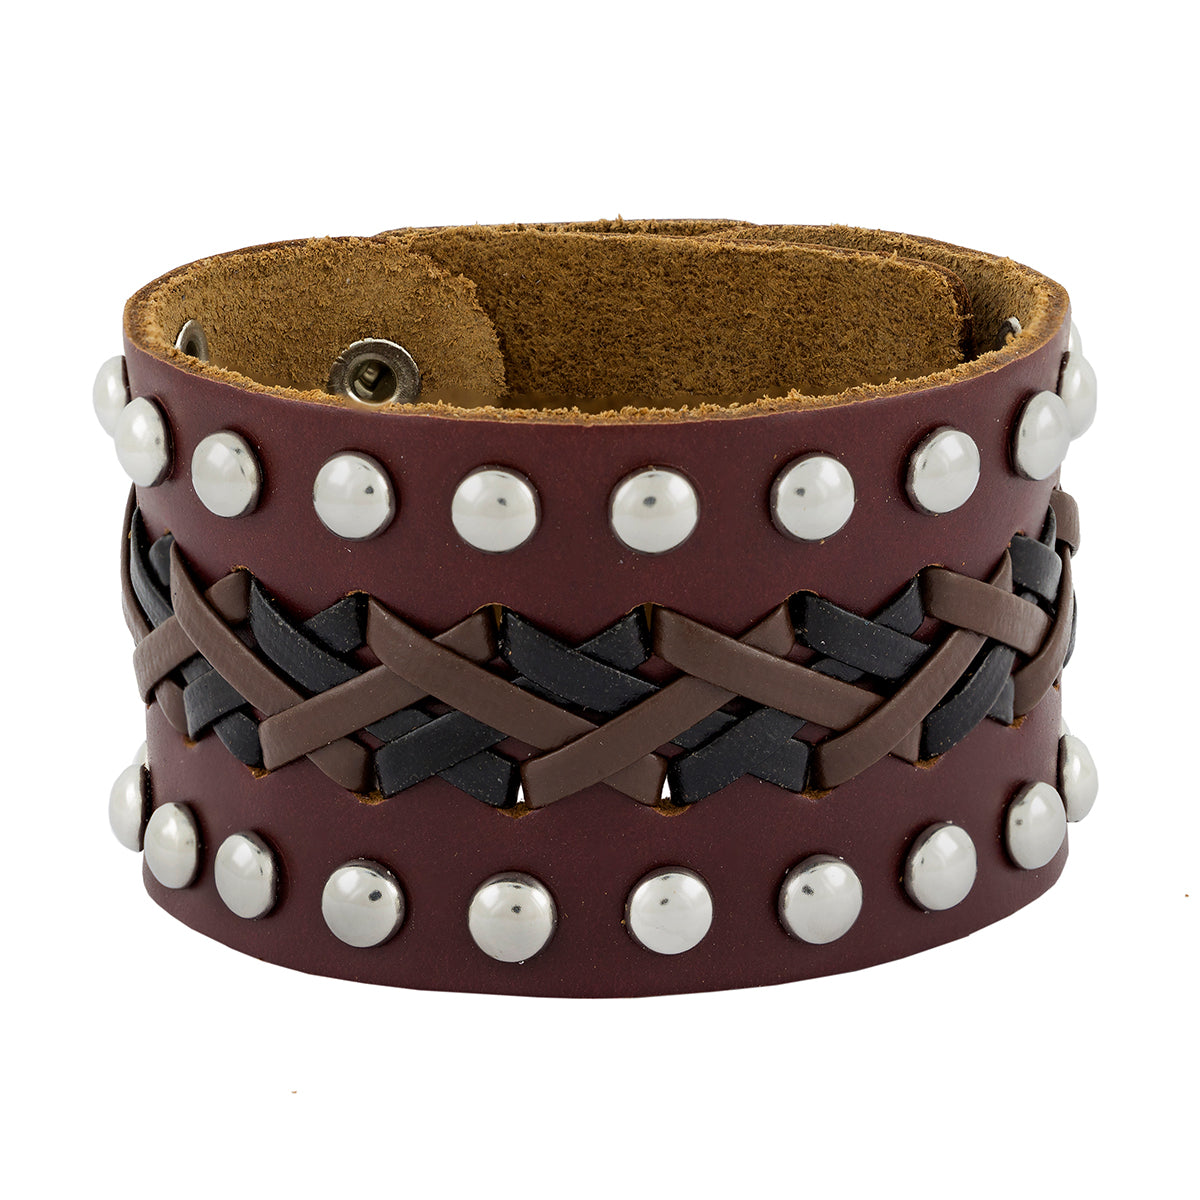 Biker Funky Braided Handcrafted Brown Leather Wrist Band Bracelet